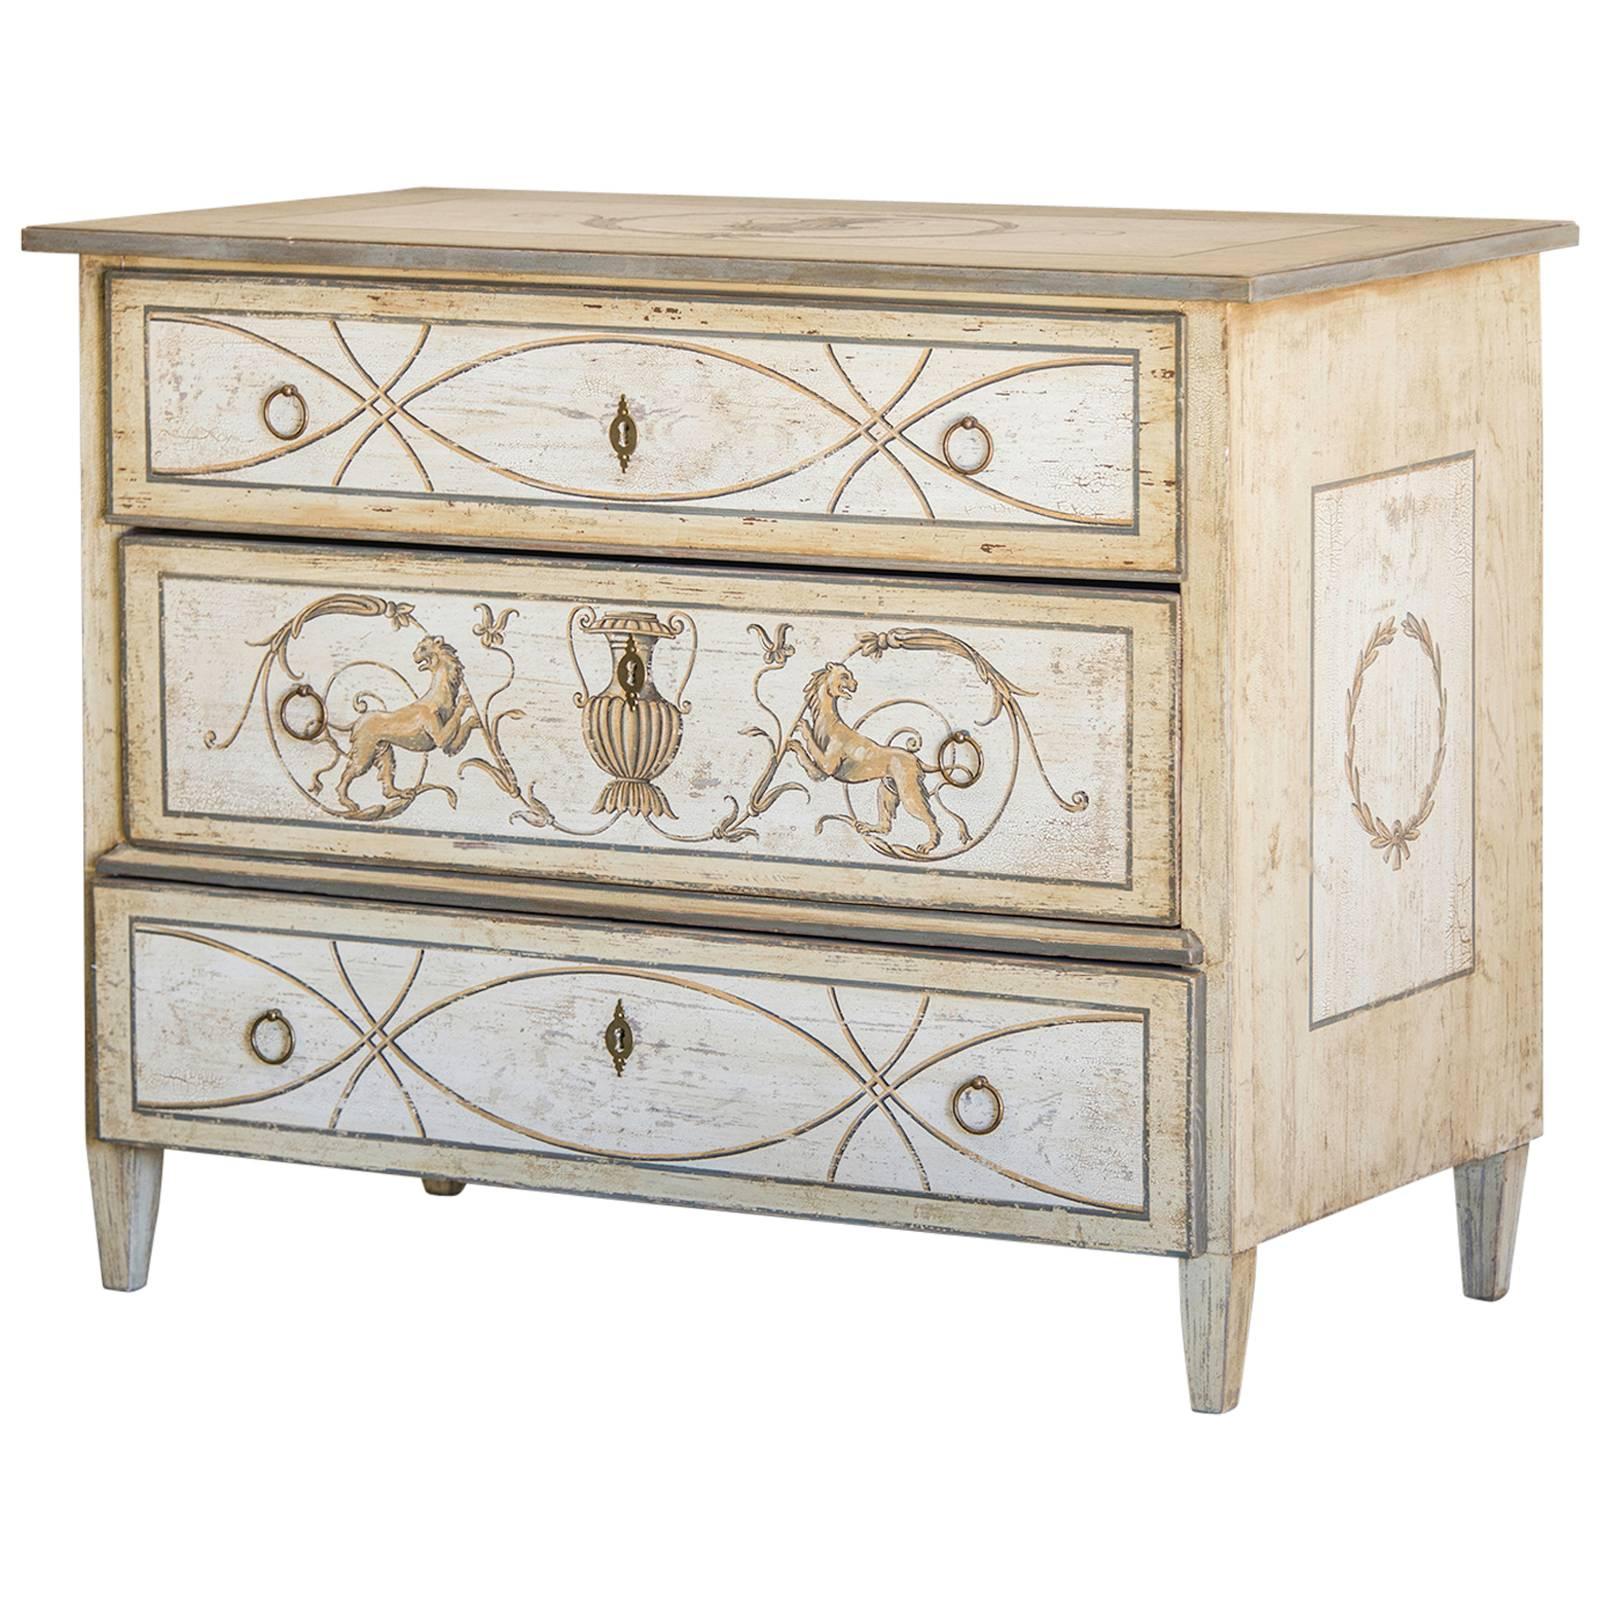 Biedermeier Period Antique German Neoclassical Style Chest of Drawers circa 1830